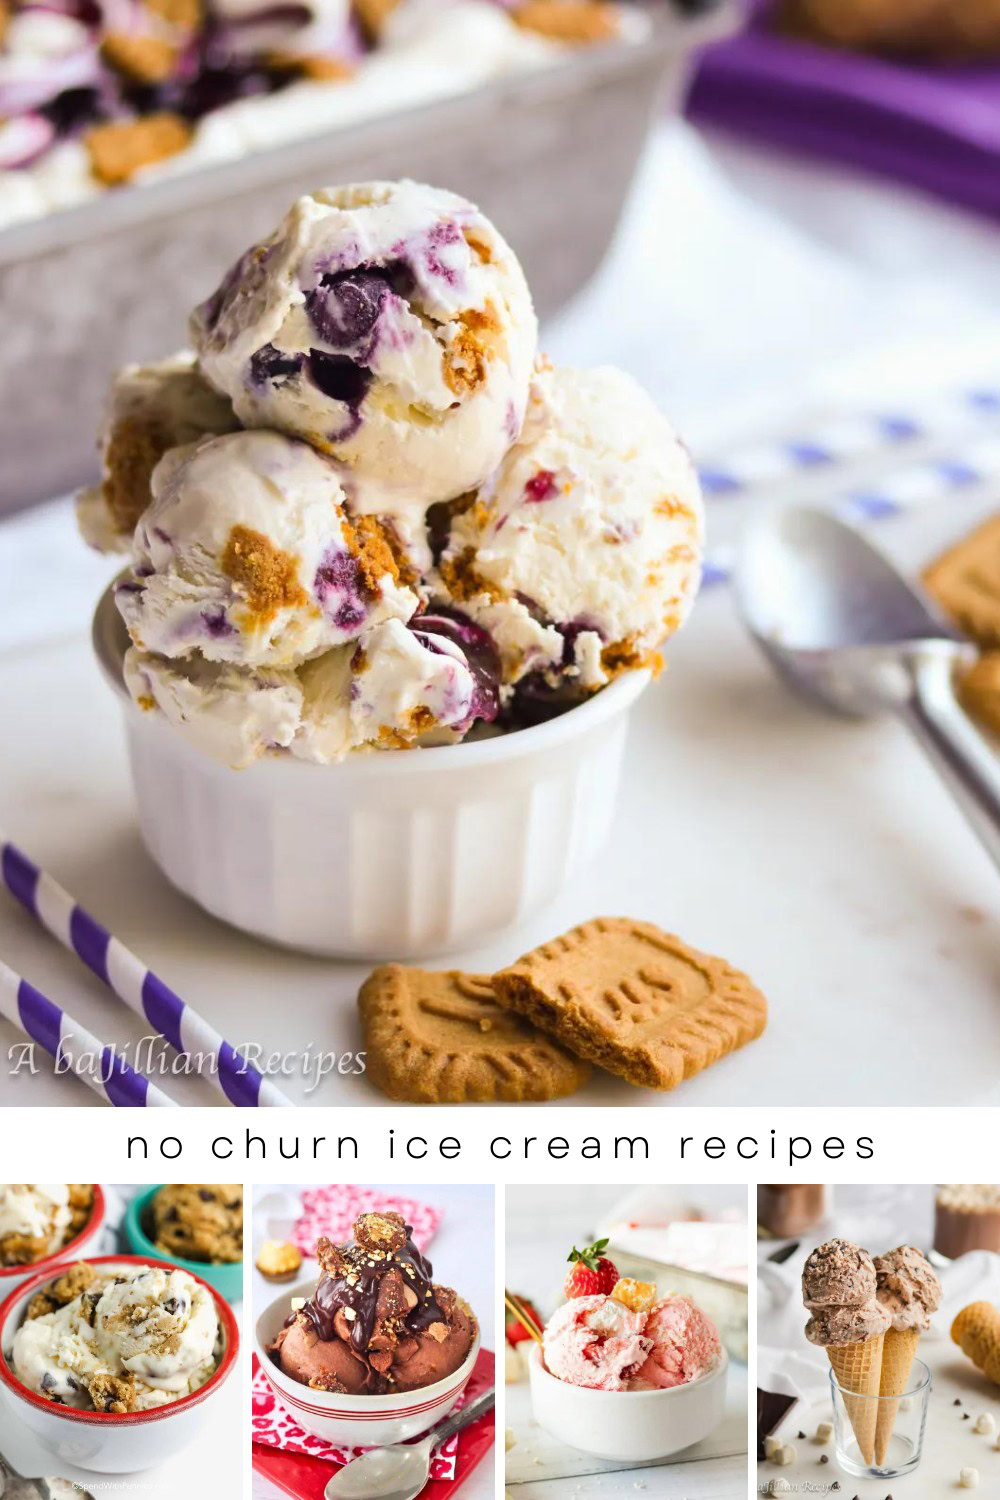 Dive into a world of frozen delights with our easy no-churn ice cream recipes! Perfect for any ice cream lover, these simple yet delicious treats are sure to satisfy your sweet cravings. 🍨❄️ #HomemadeIceCream #NoChurnDelights